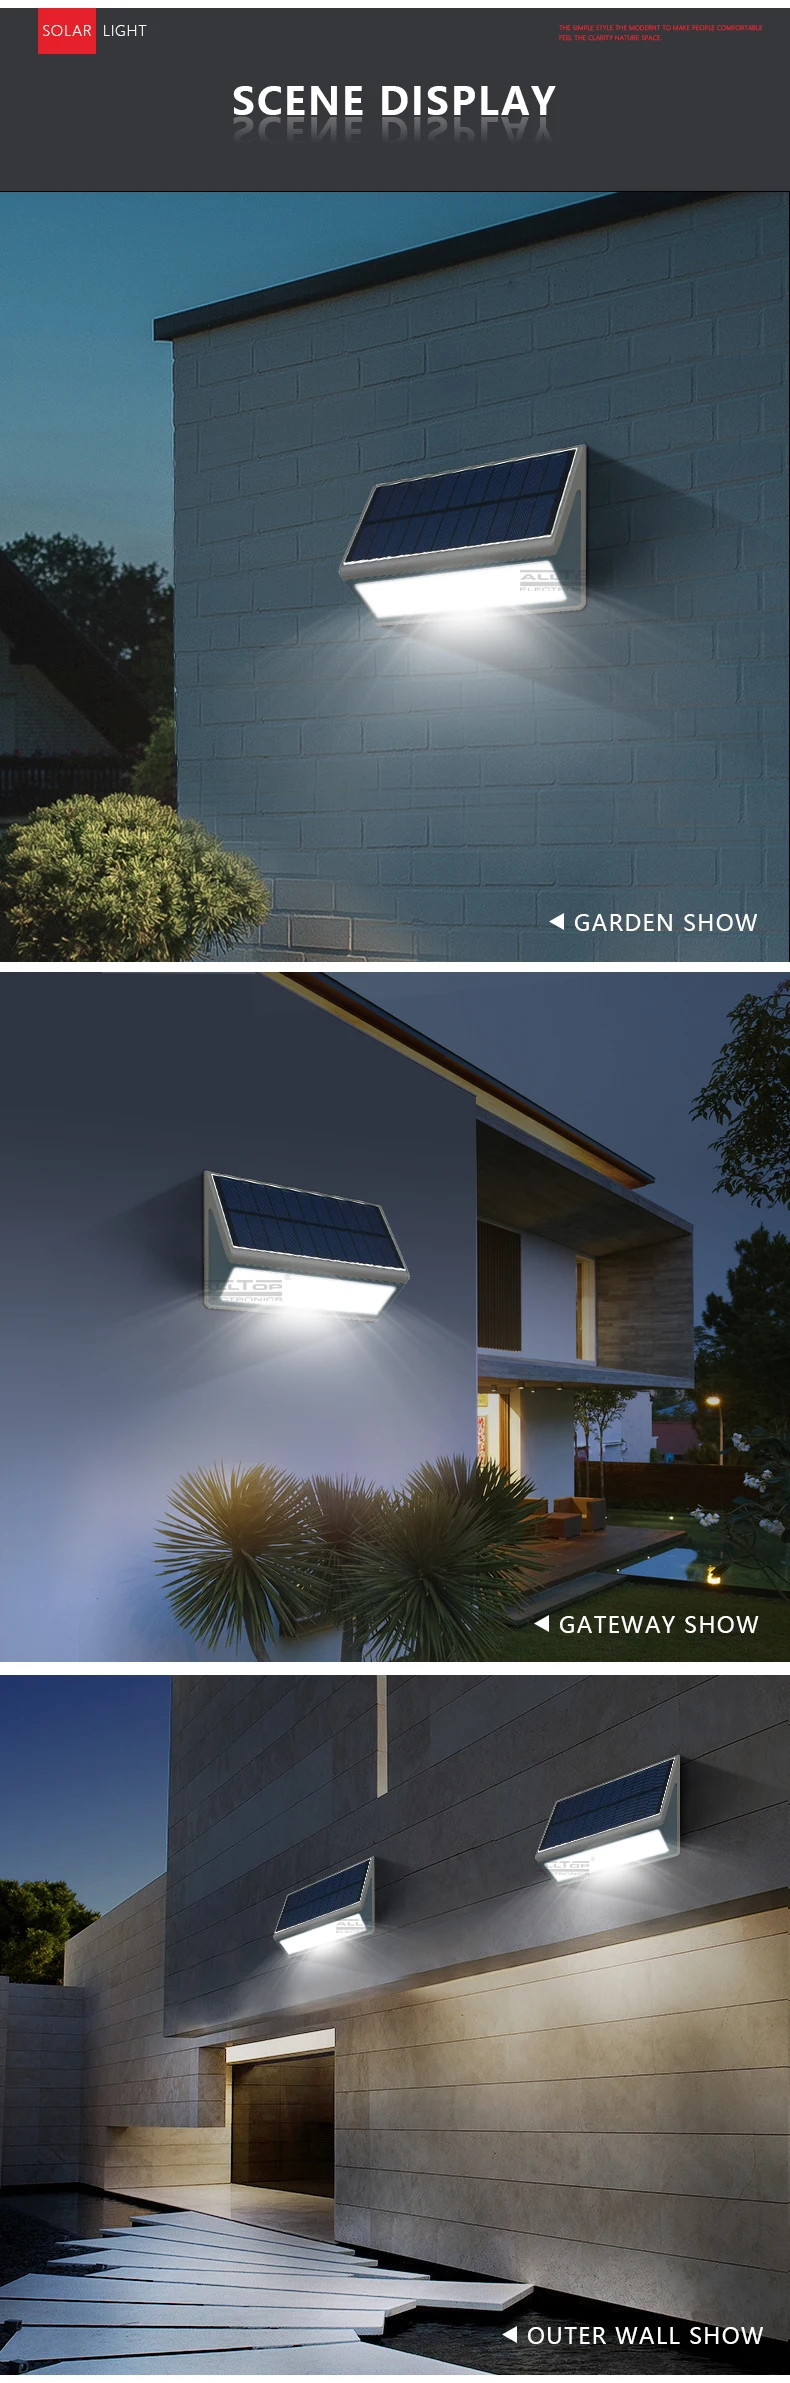 ALLTOP Hot sale high quality surface mounted IP65 3w 5w outdoor LED solar wall light